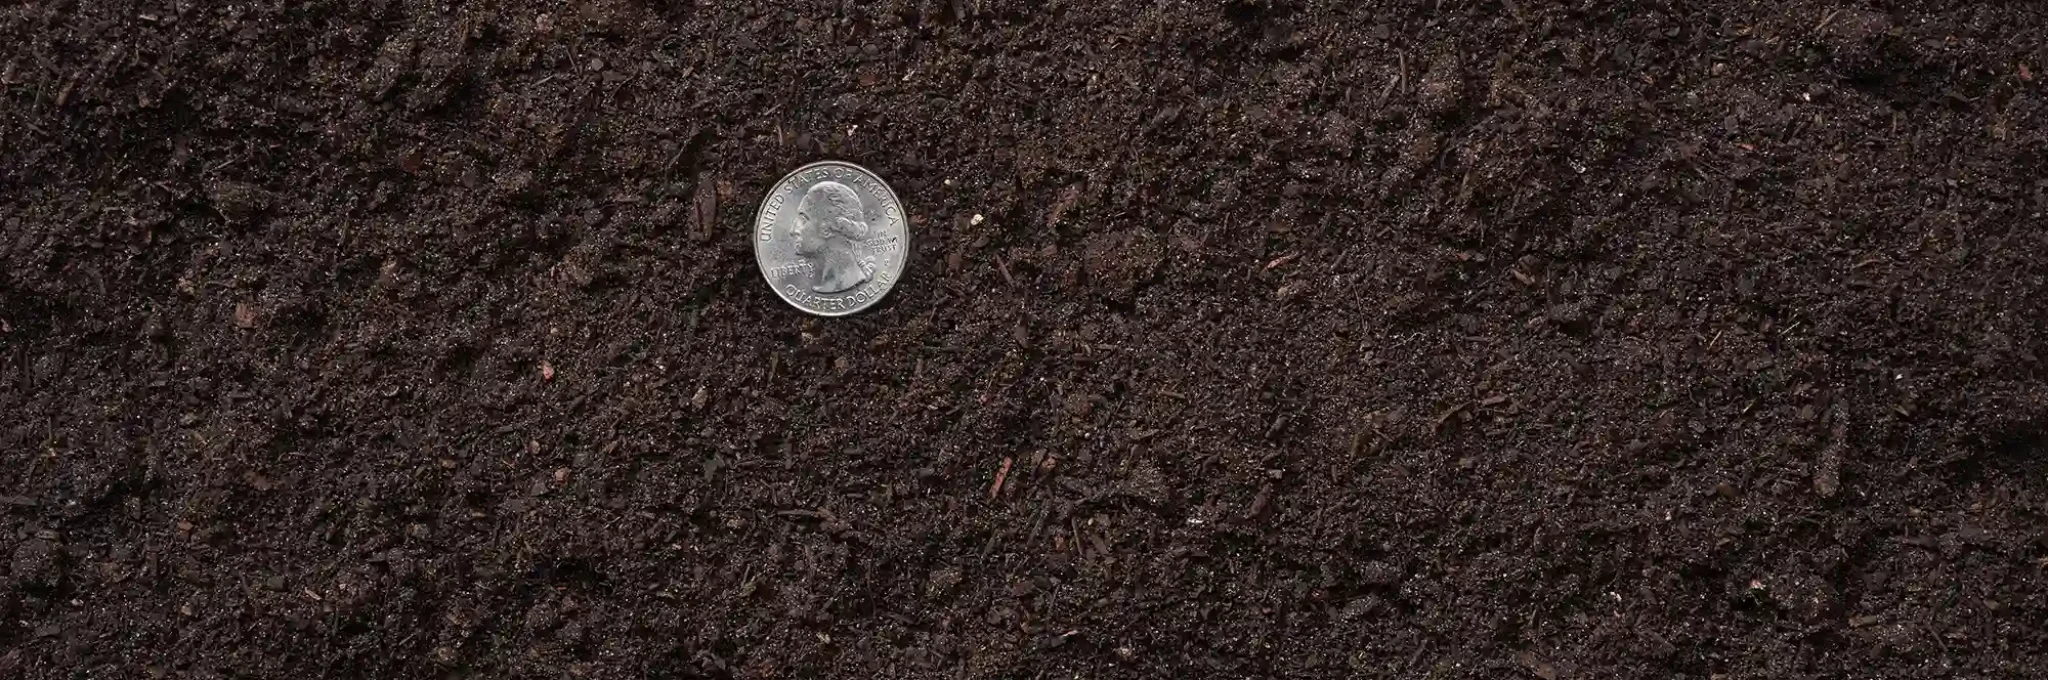 A close-up view of COMAND Microbial Turfbuilder for Turf Managers showing a U.S. quarter for scale.